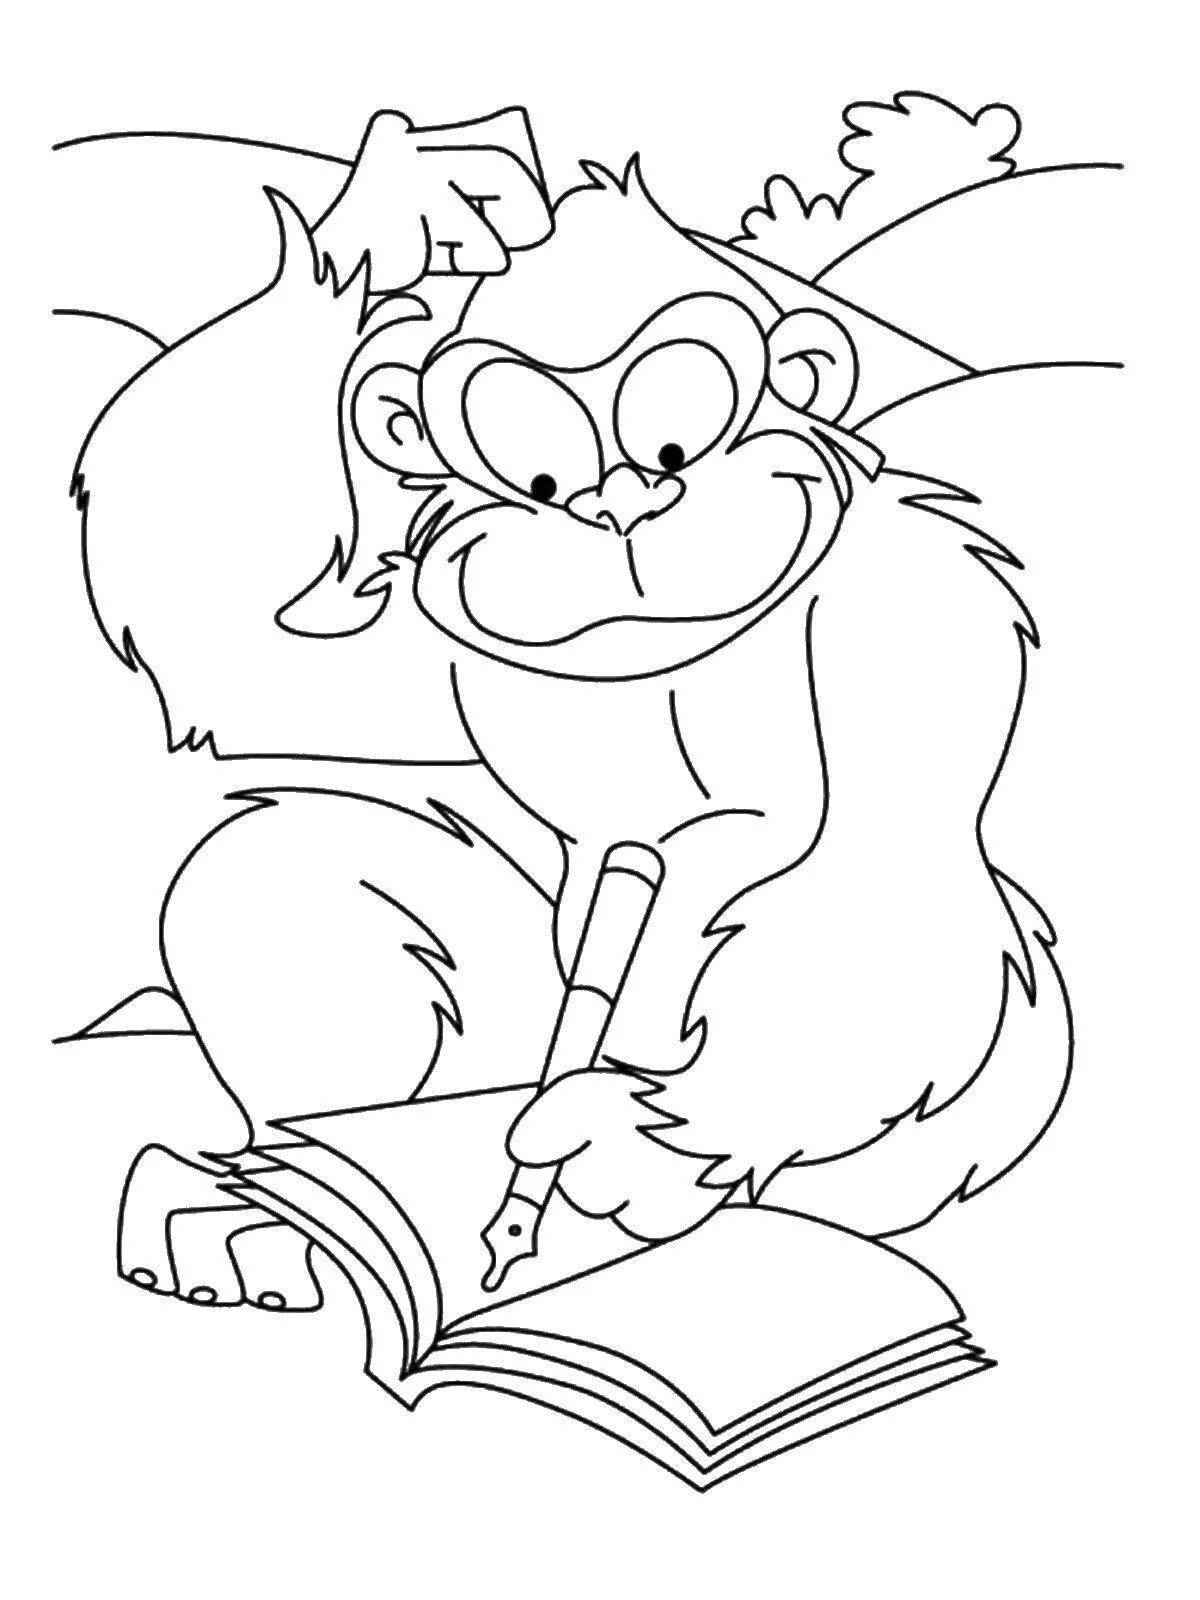 Colorful scientist cat coloring page